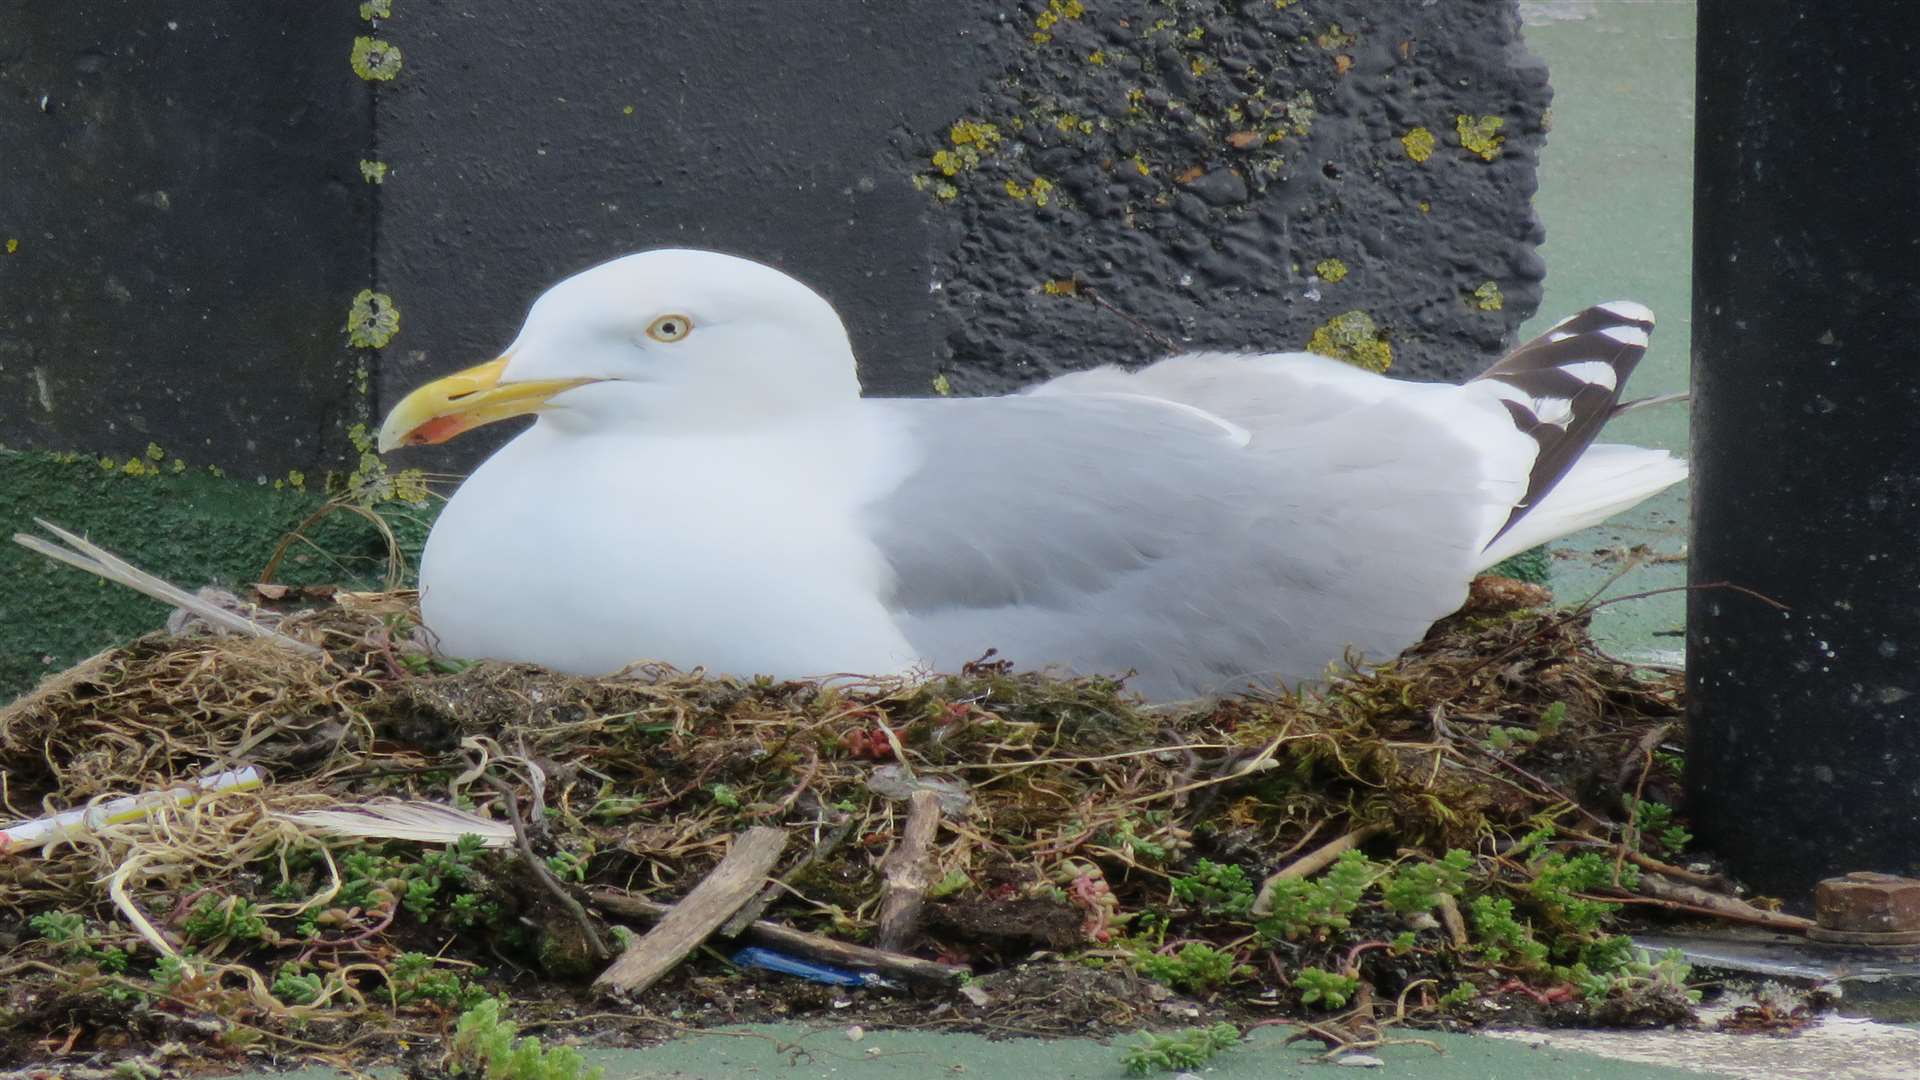 The female gull sitting on the nest. Pic by Andy Clark